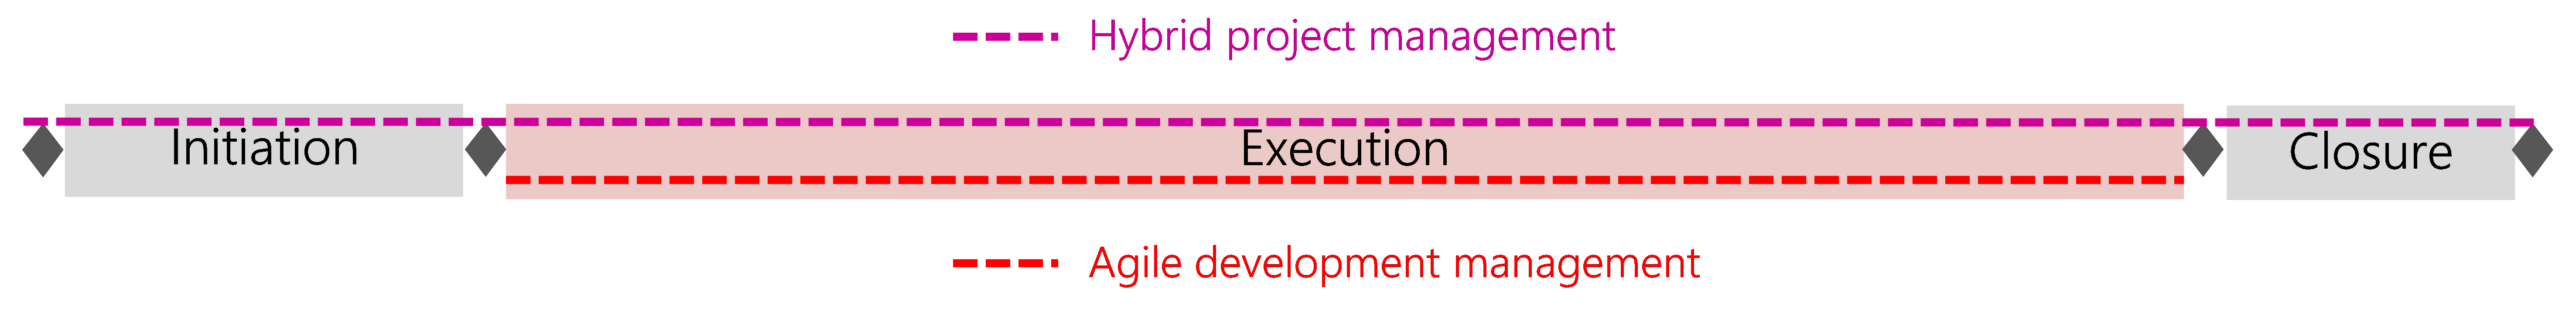 Figure 33: Phase model with agile development